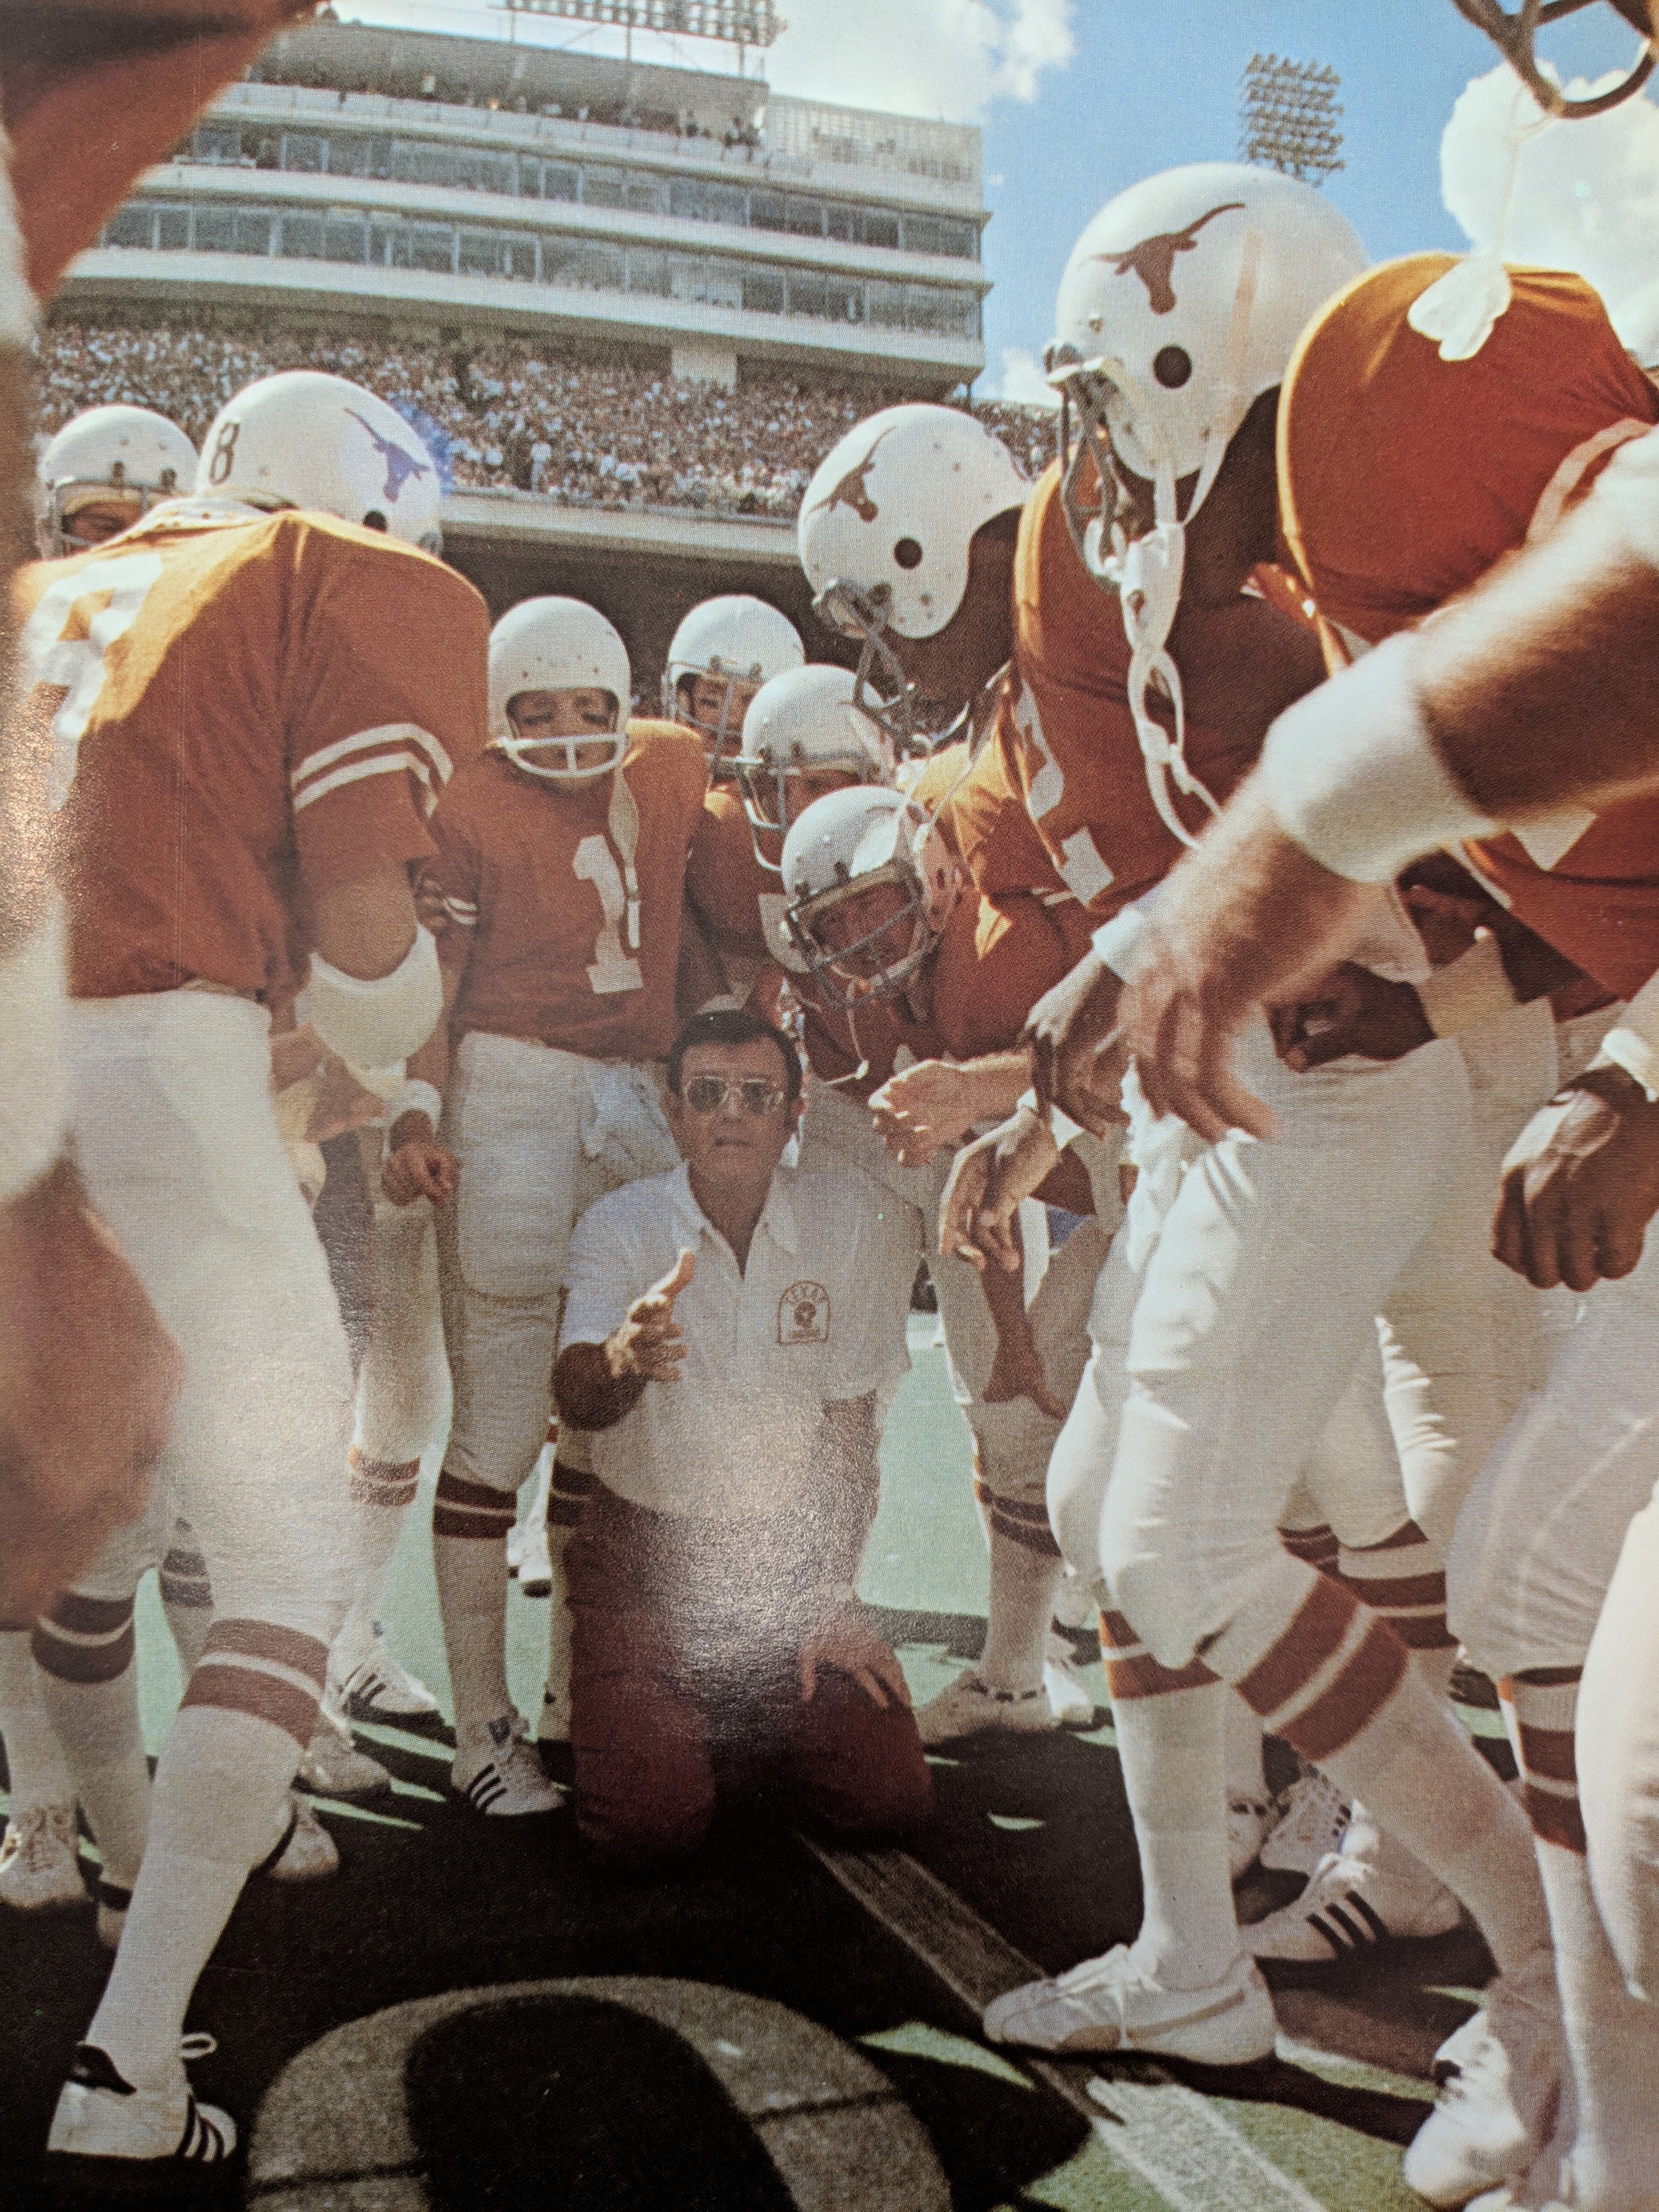 Former Longhorn Earl Campbell gives donation to National Multiple